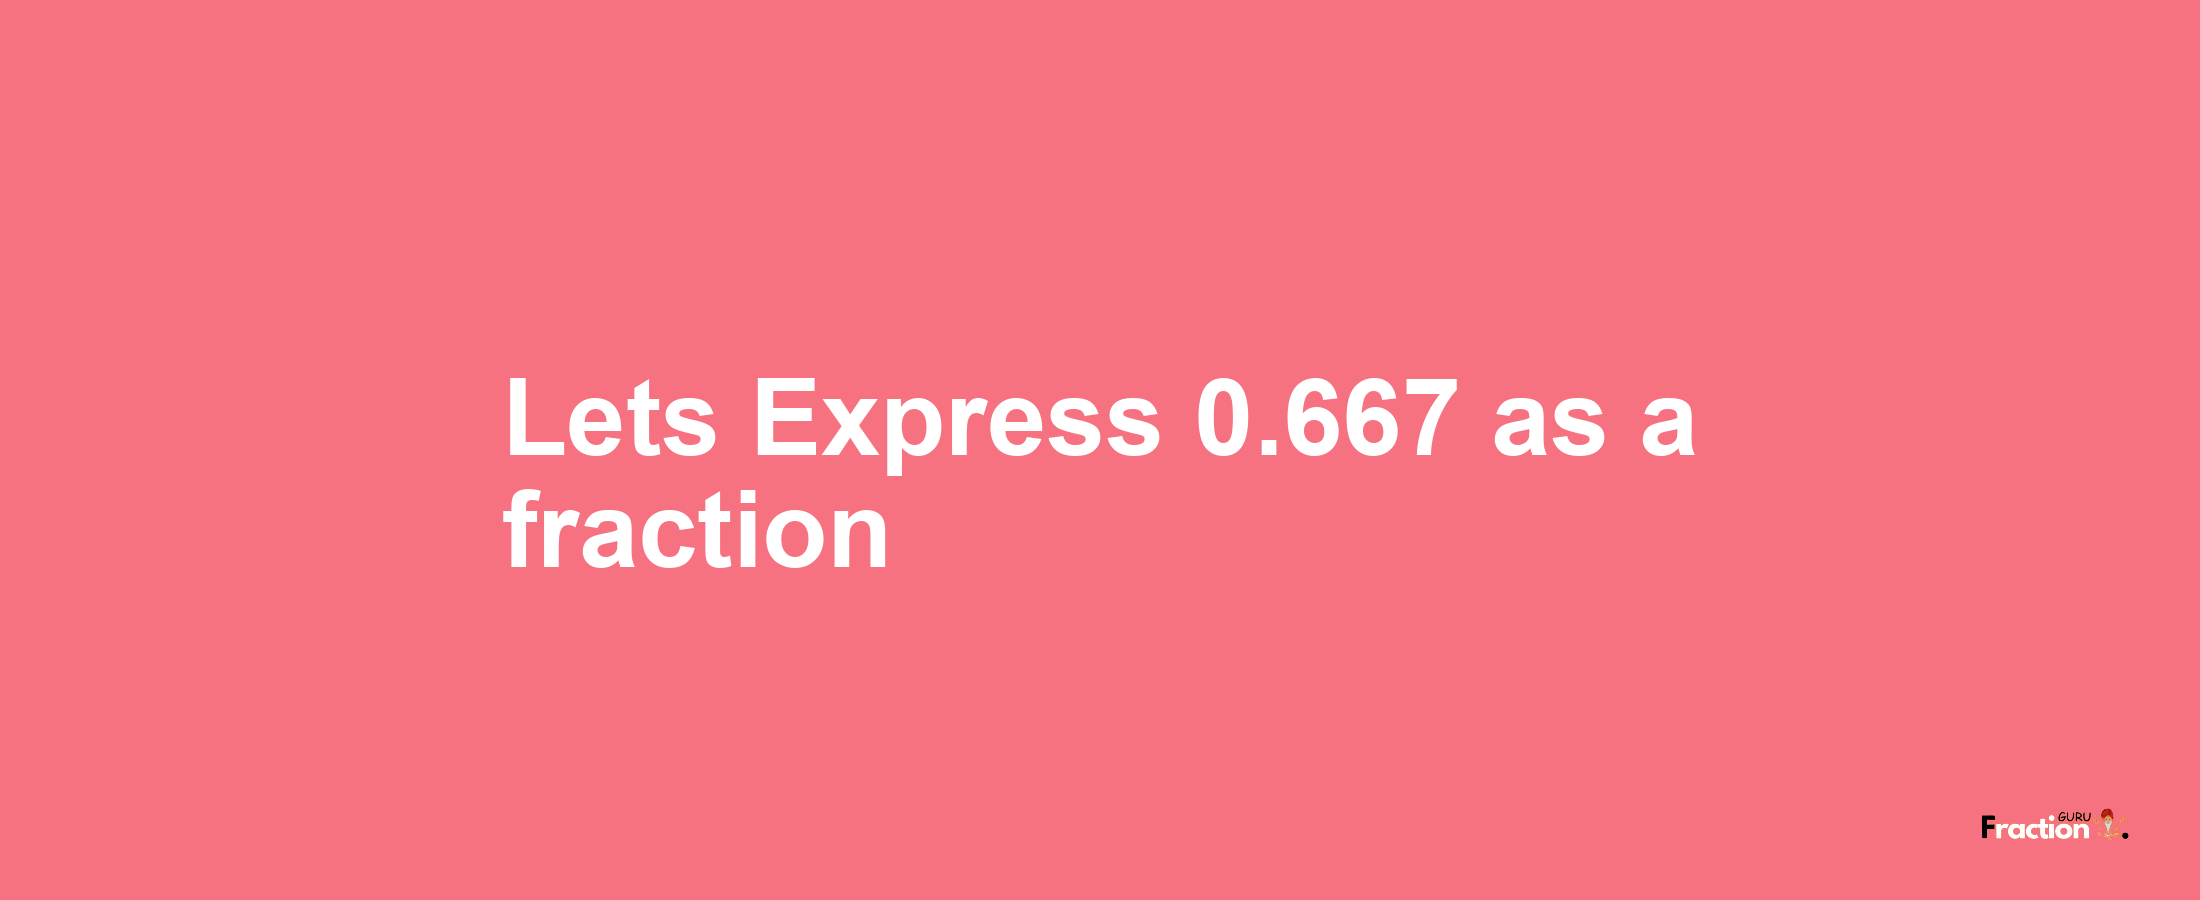 Lets Express 0.667 as afraction